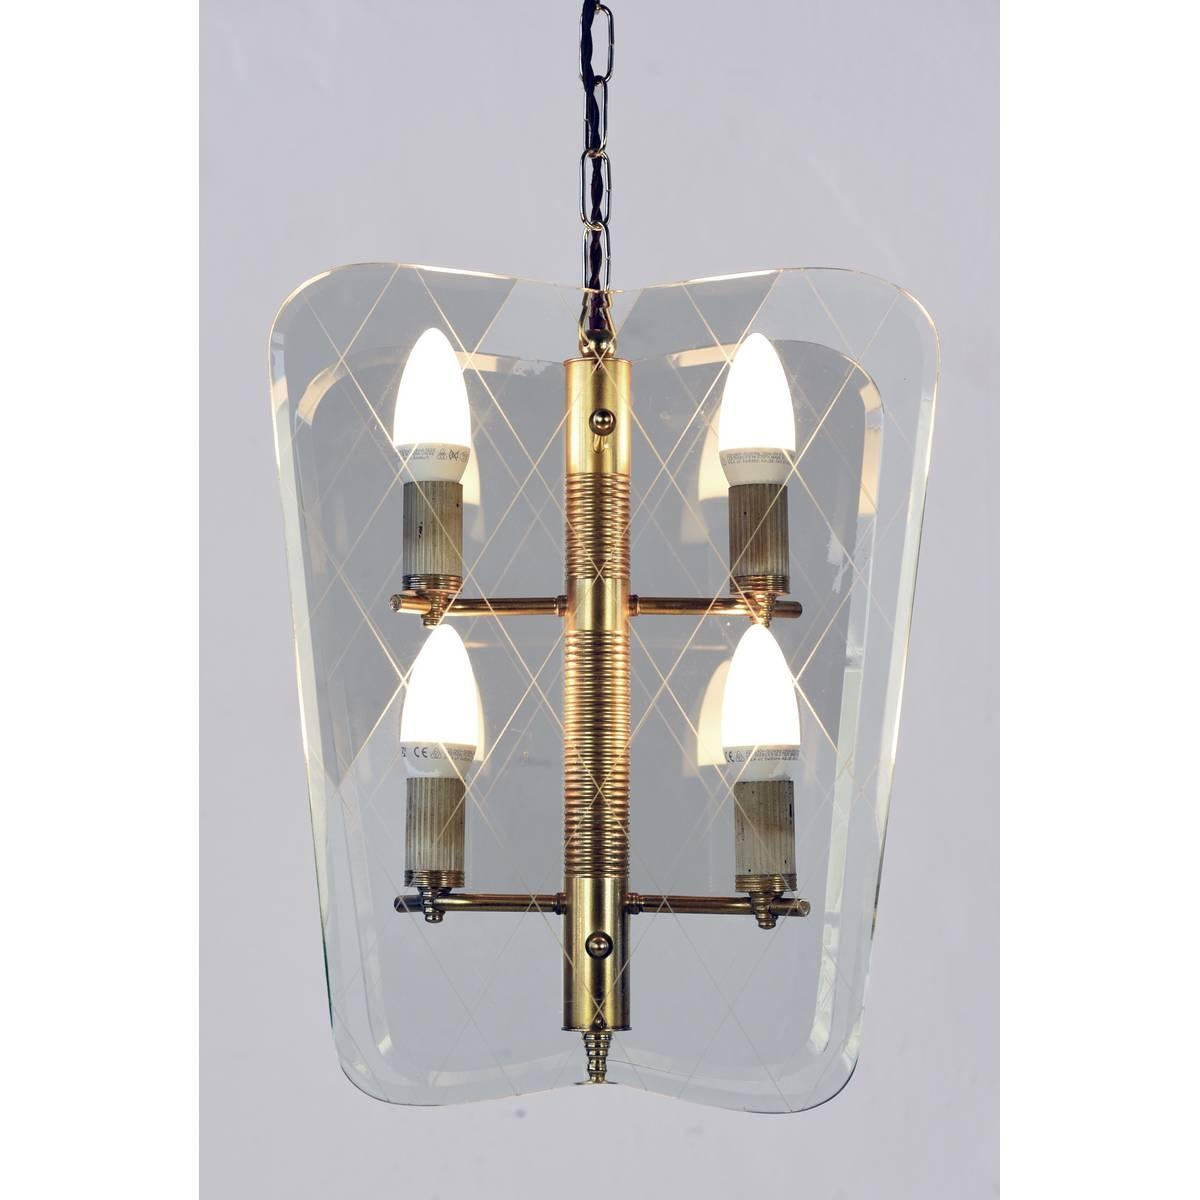 Mid-Century Modern 1940s Cut-Glass Pendant Lamp by Fontana Arte, Italy For Sale